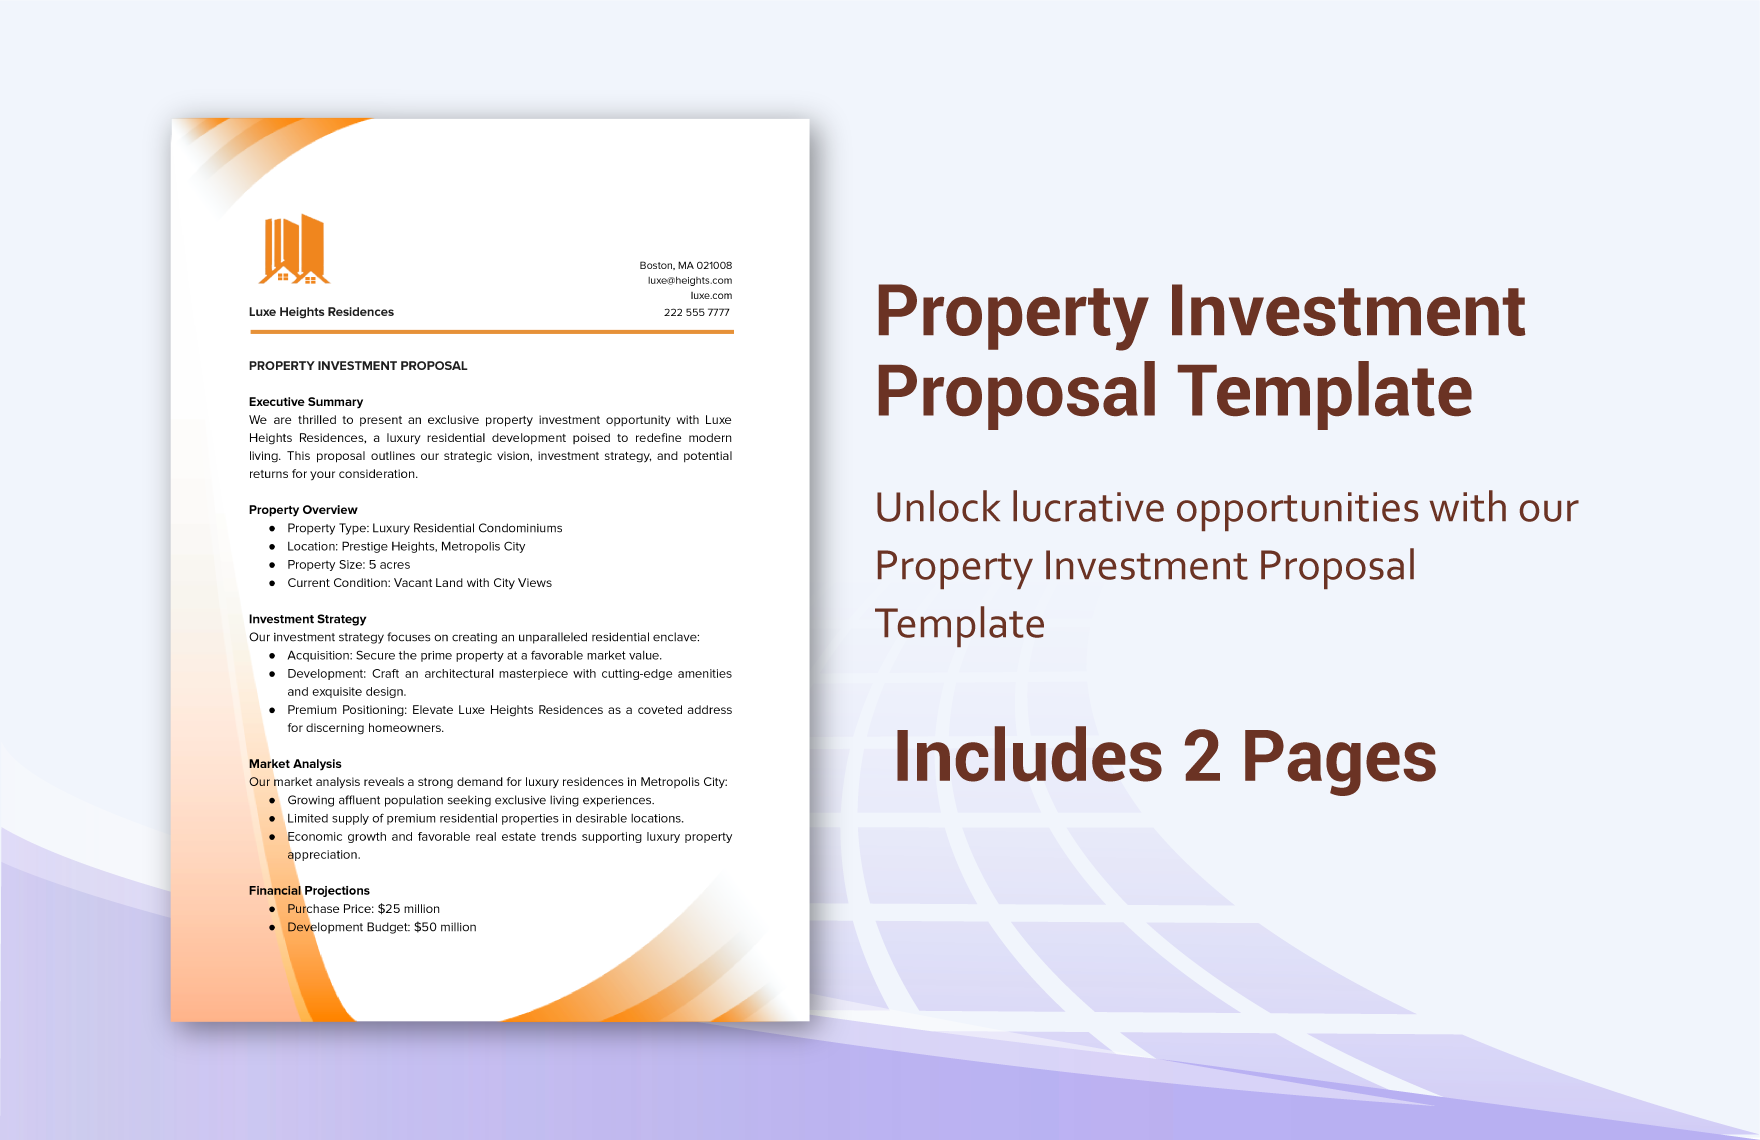 Property Investment Proposal Template